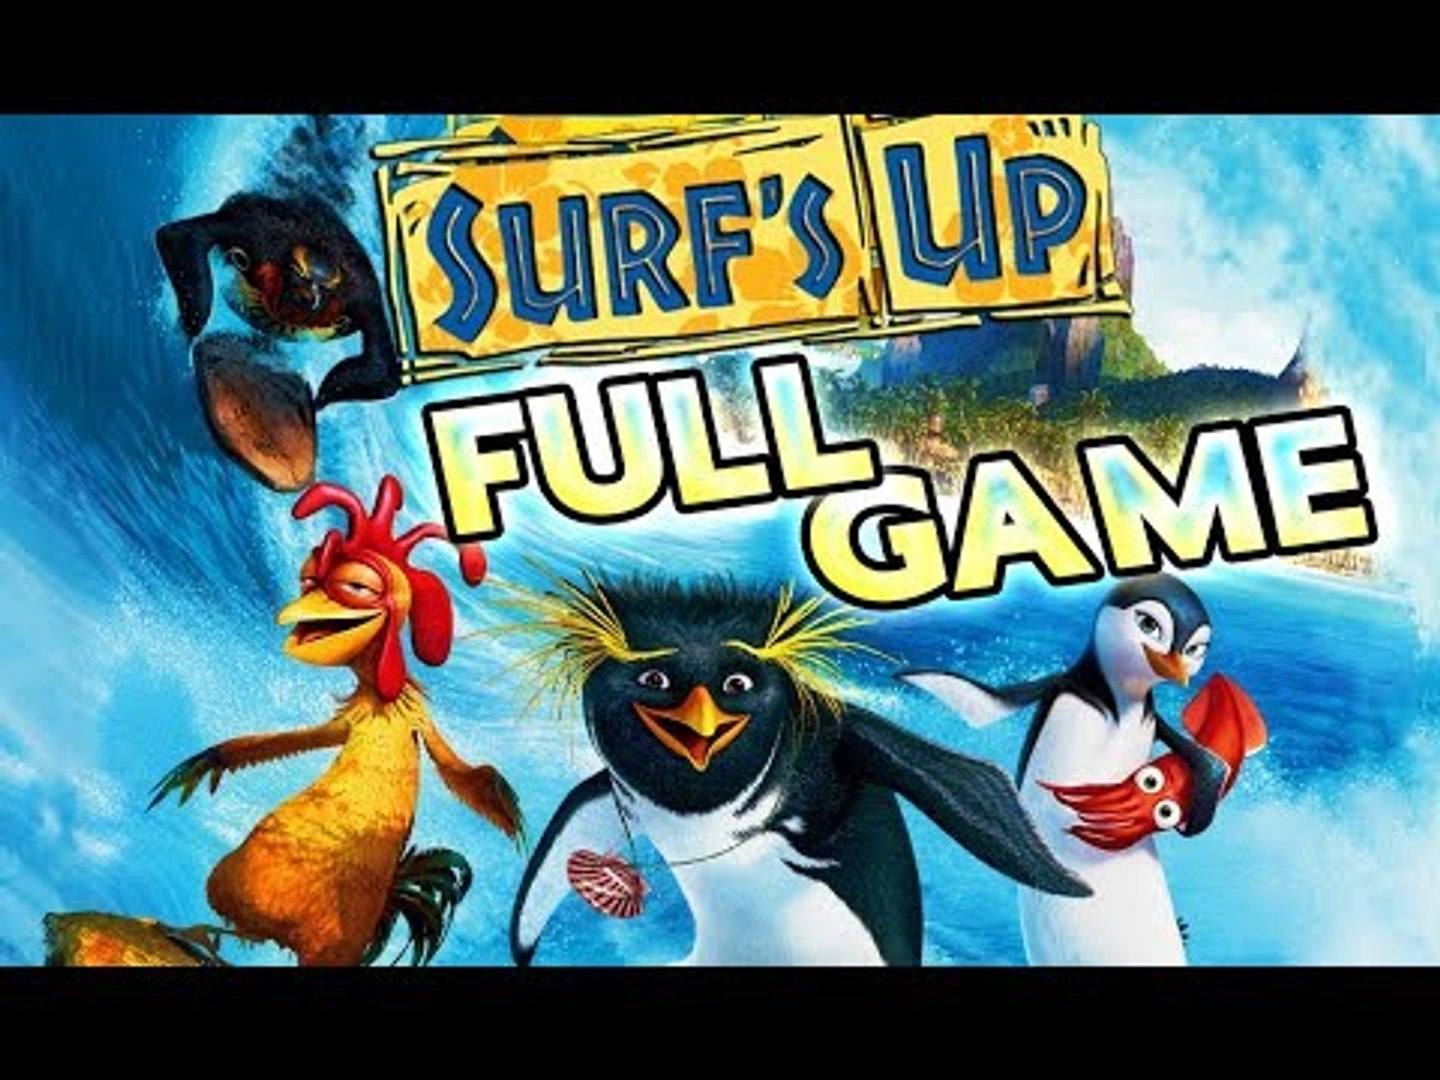 Surf's Up FULL Movie GAME Longplay (PS3, X360, Wii, PS2, GCN, PC) - video  Dailymotion